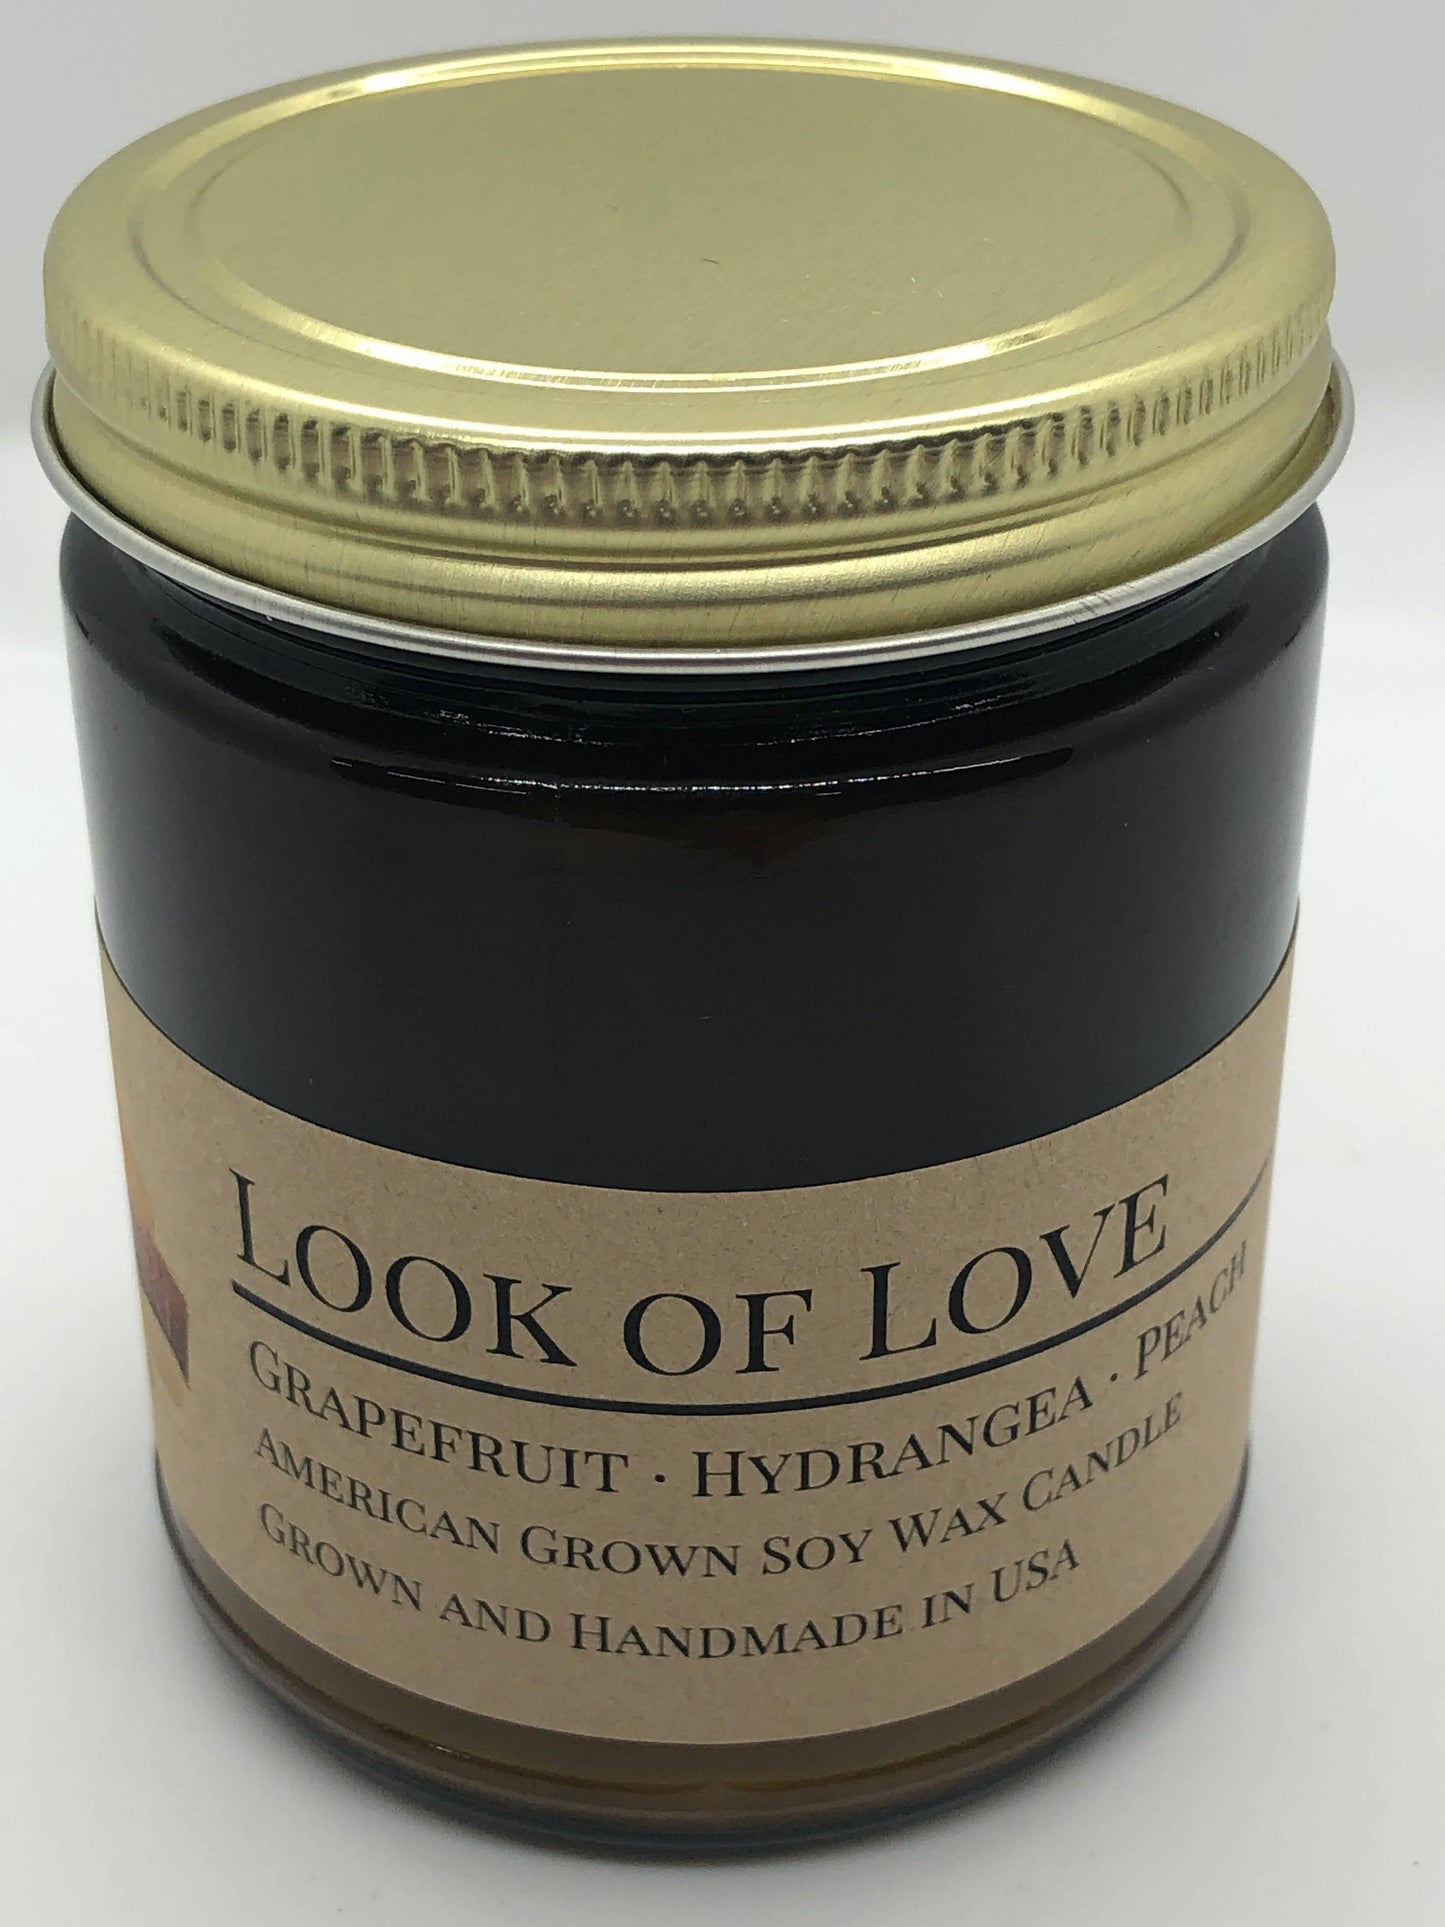 look of love soy wax candle | 9 oz amber apothecary jar by prairie fire tallow, candles, and lavender